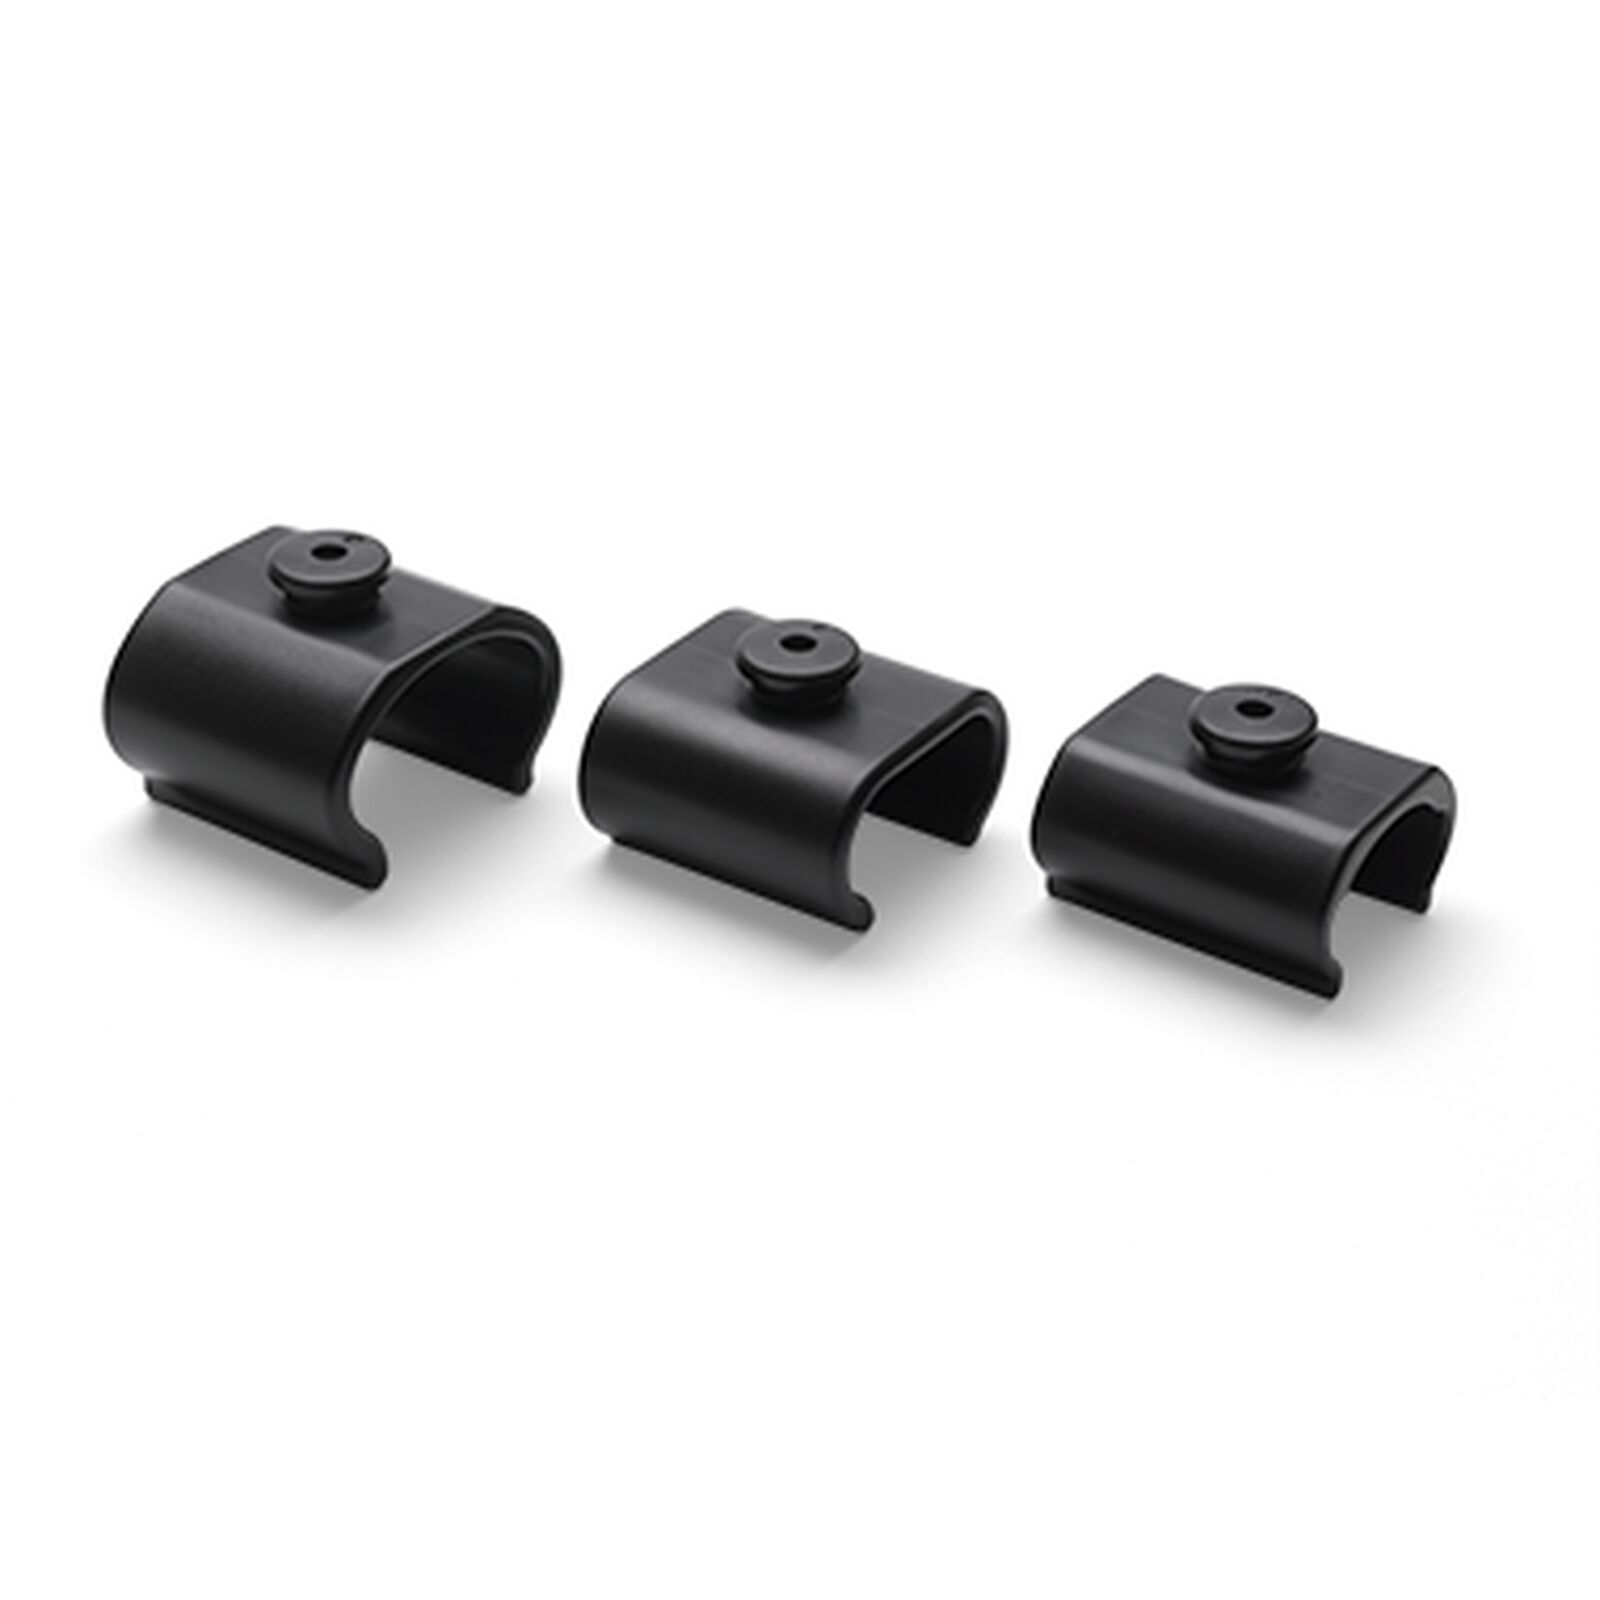 Bugaboo cup holder adapter set (2017 model) - View 1